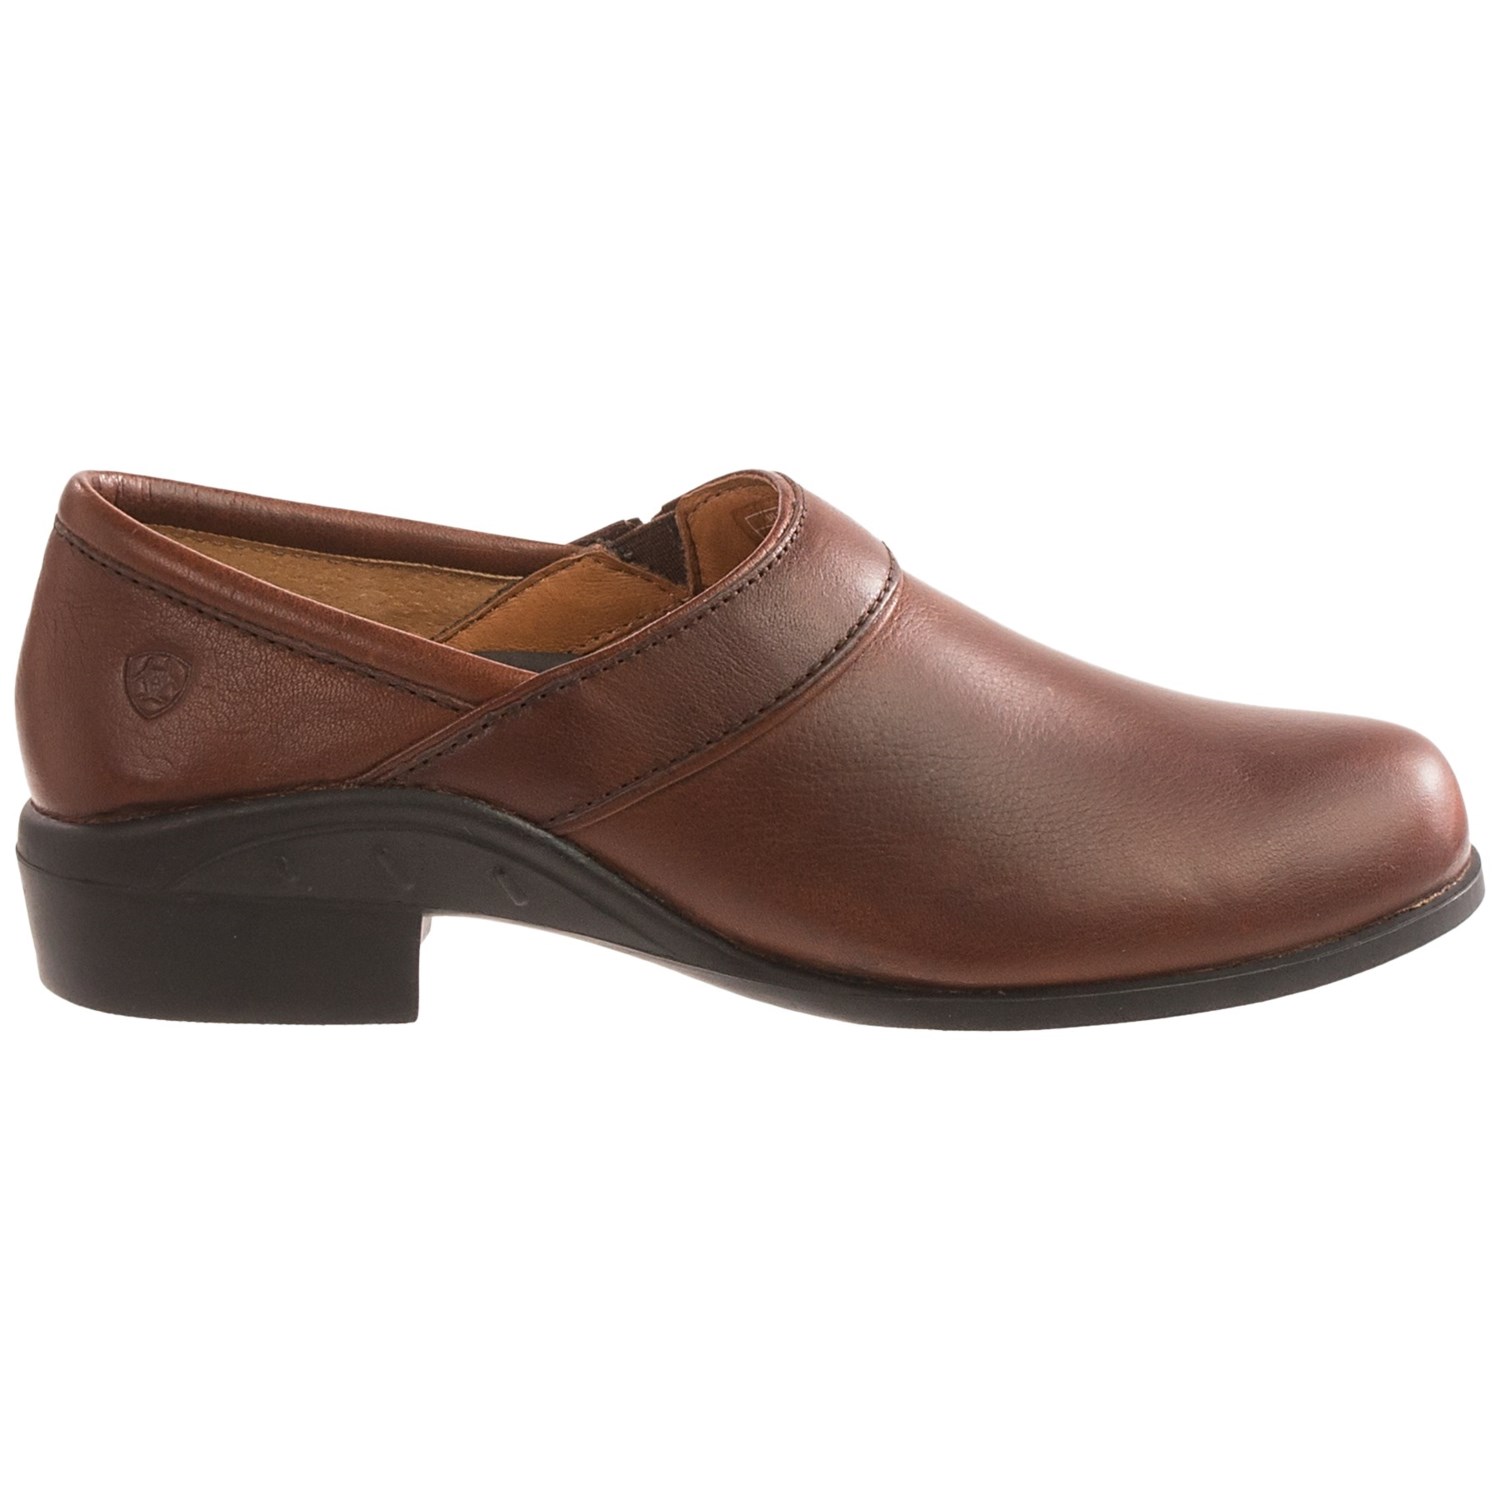 Ariat Leather Sport Clogs (For Women) 9403T - Save 69%